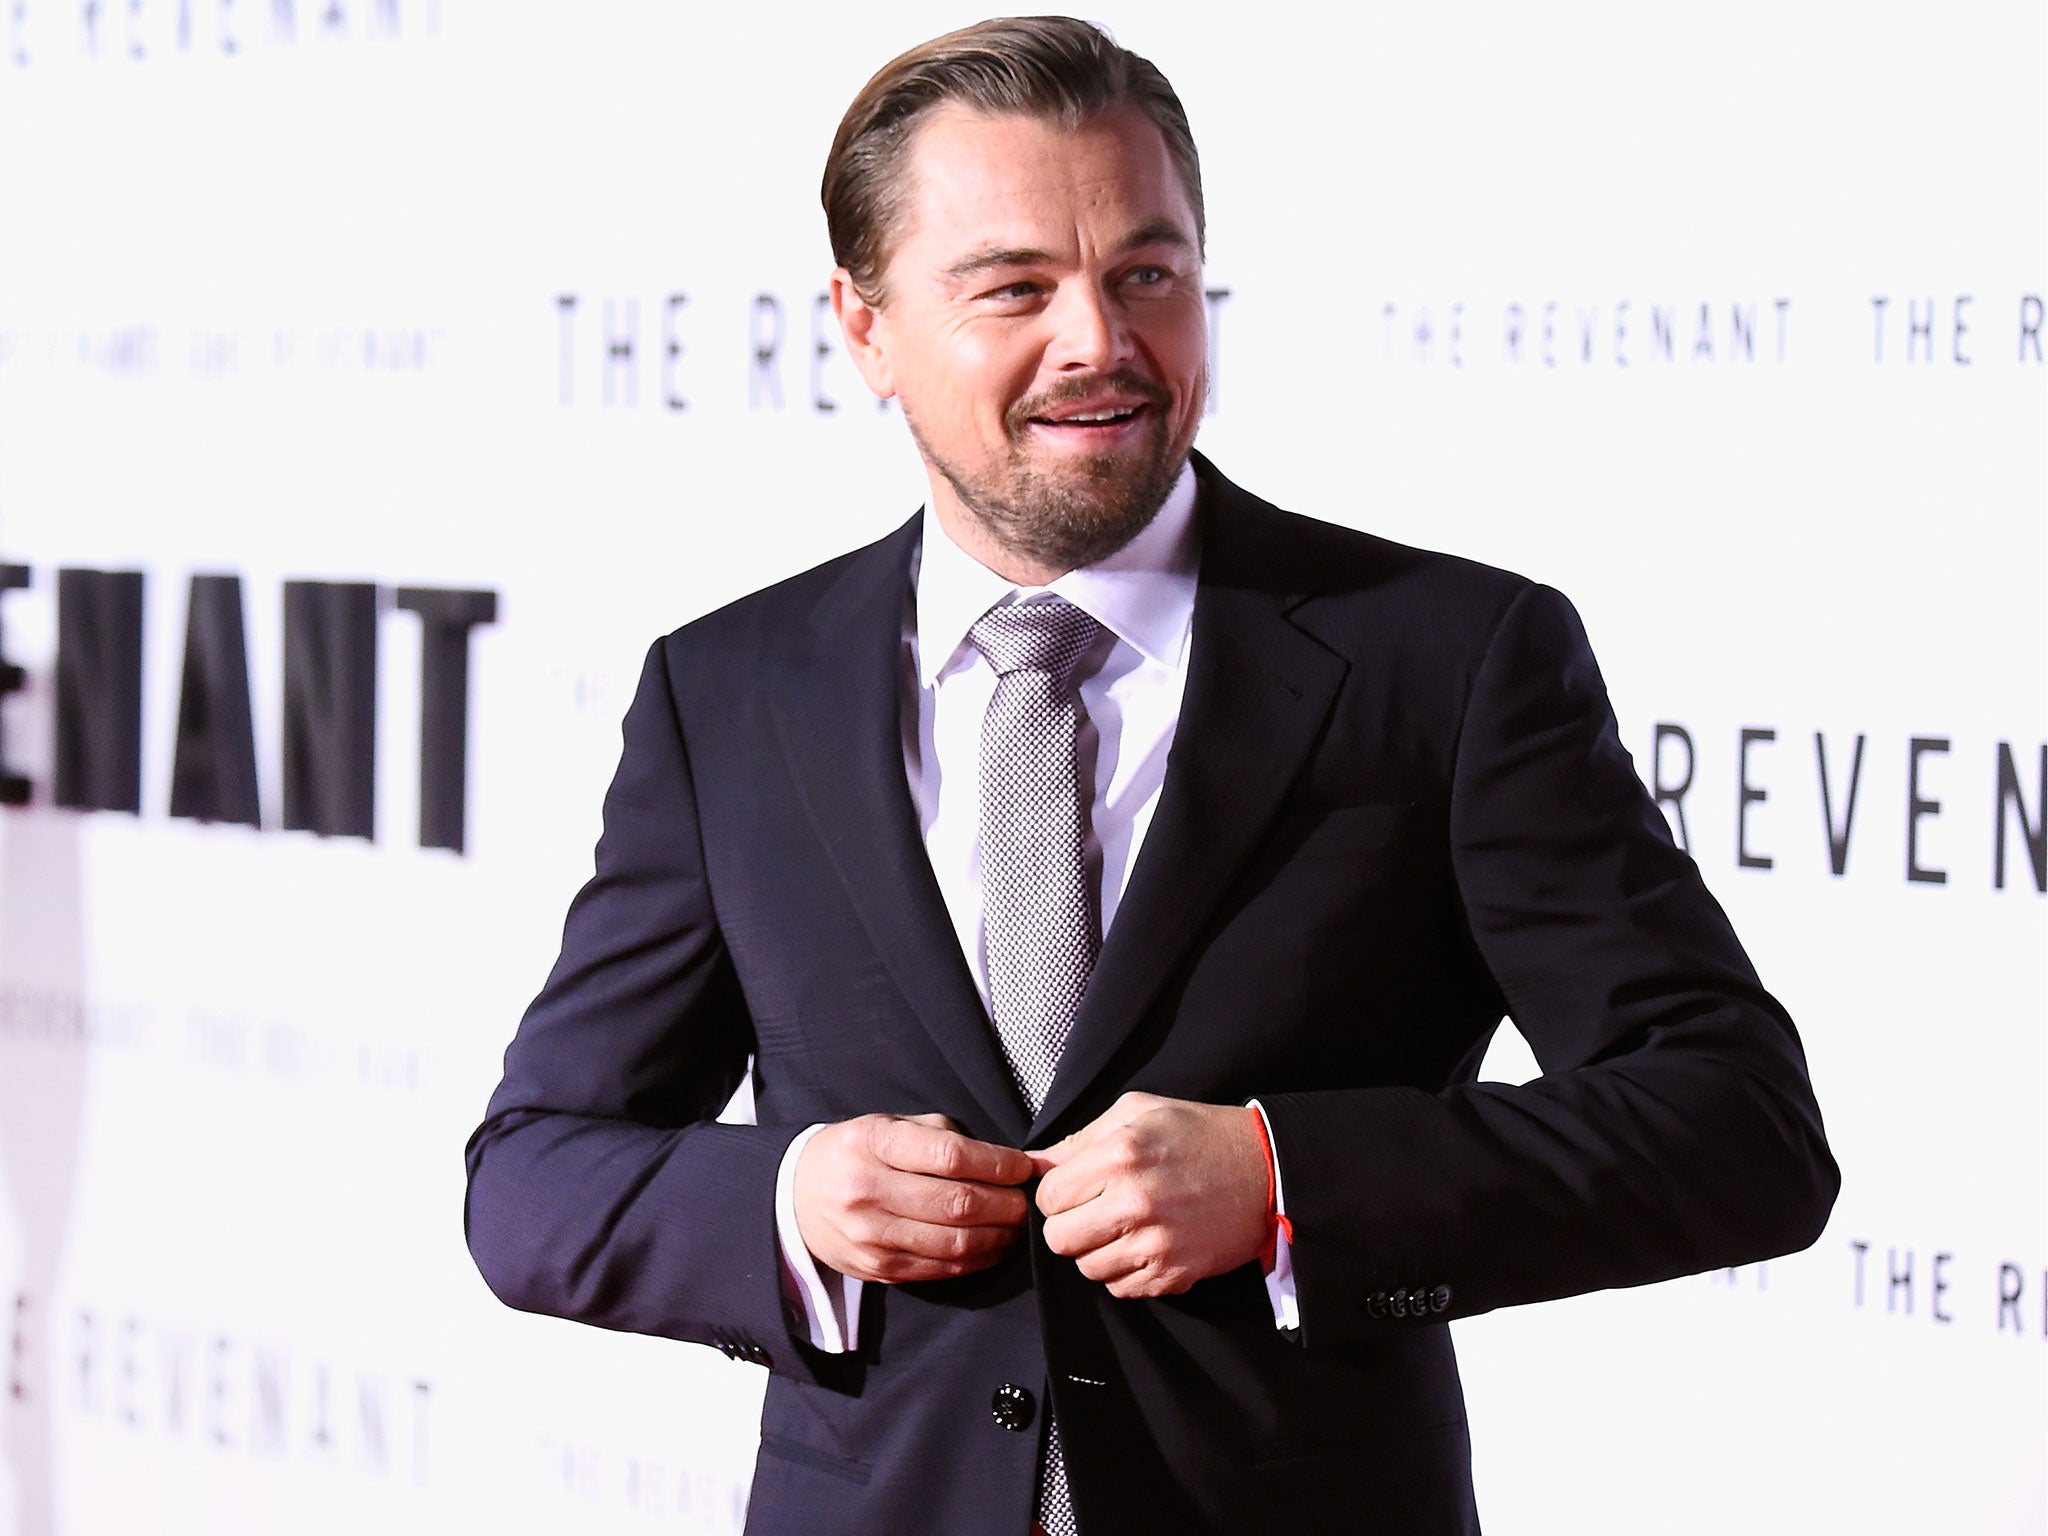 Leonardo DiCaprio arrives at the Premiere Of 20th Century Fox And Regency Enterprises' 'The Revenant' at TCL Chinese Theatre on 16 December, 2015 in Hollywood, California